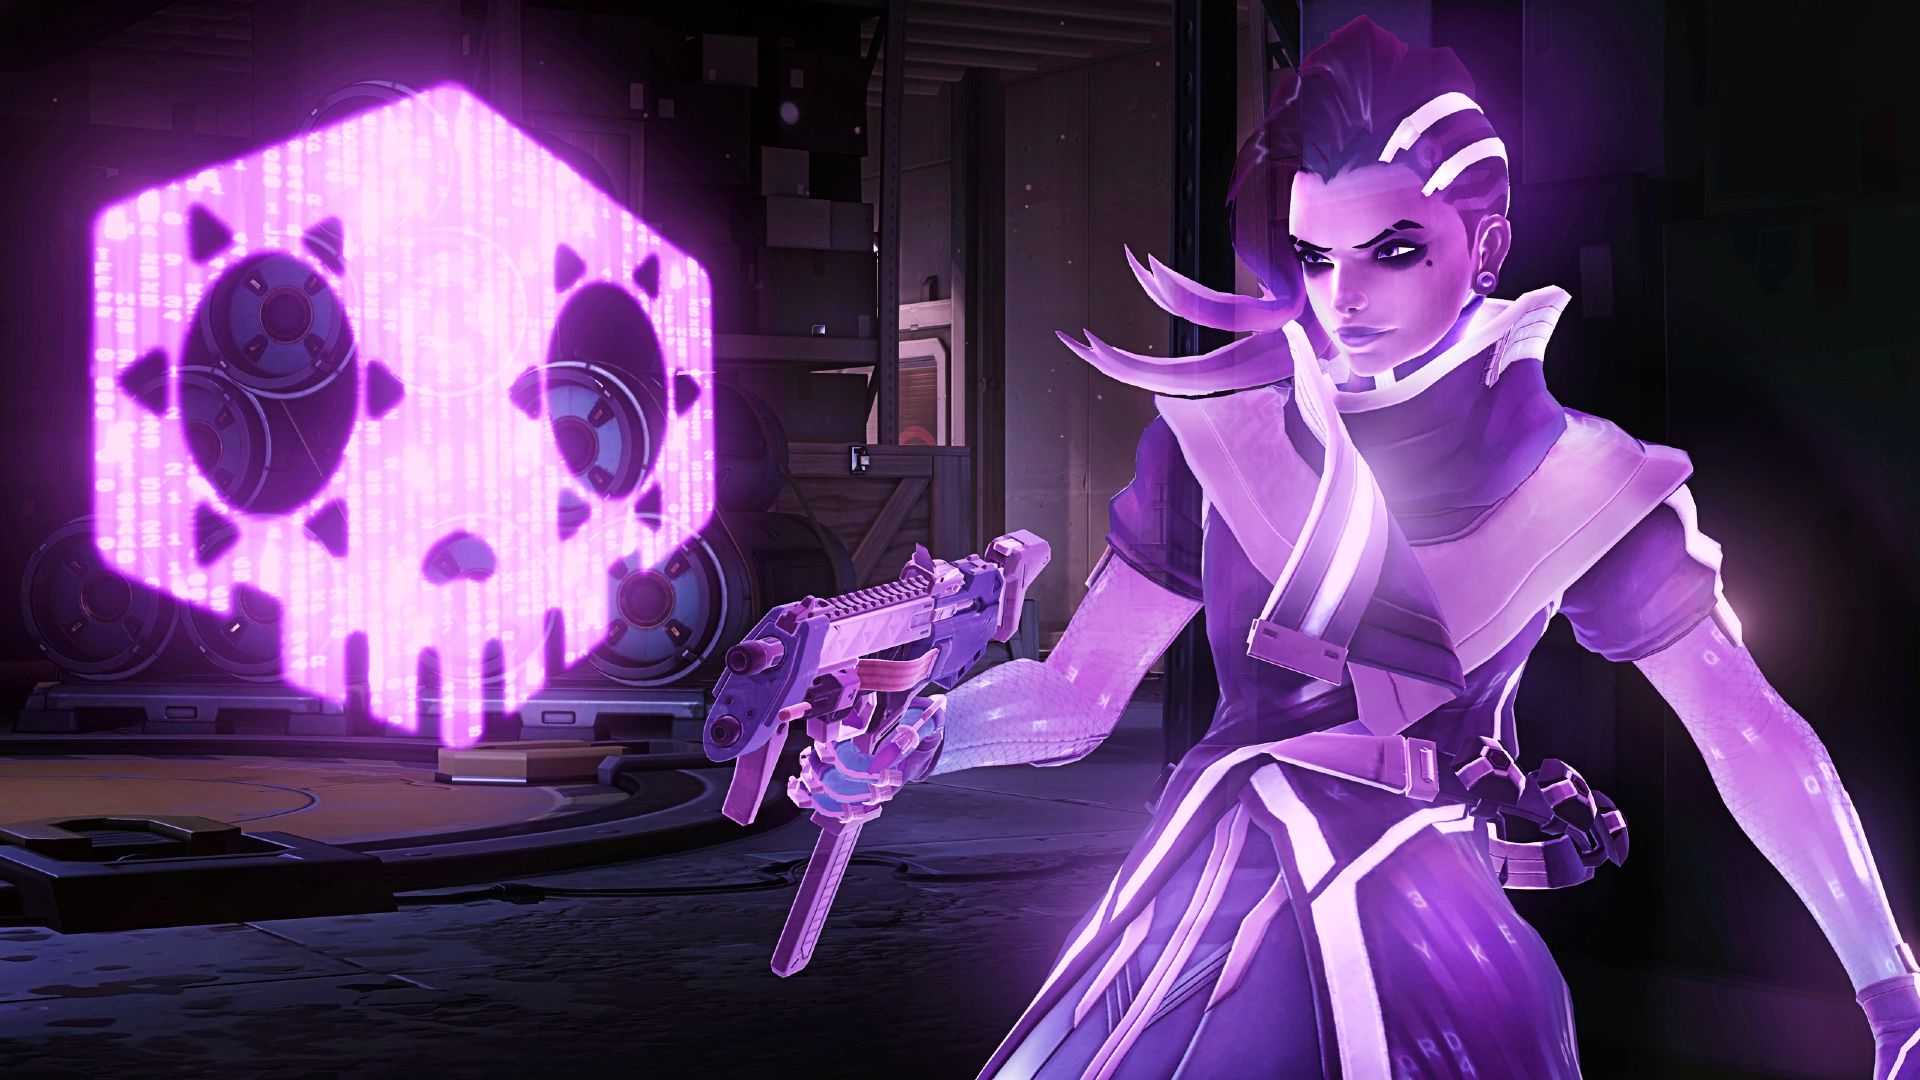 Overwatch 2 nerfs designed to protect supports, Blizzard says